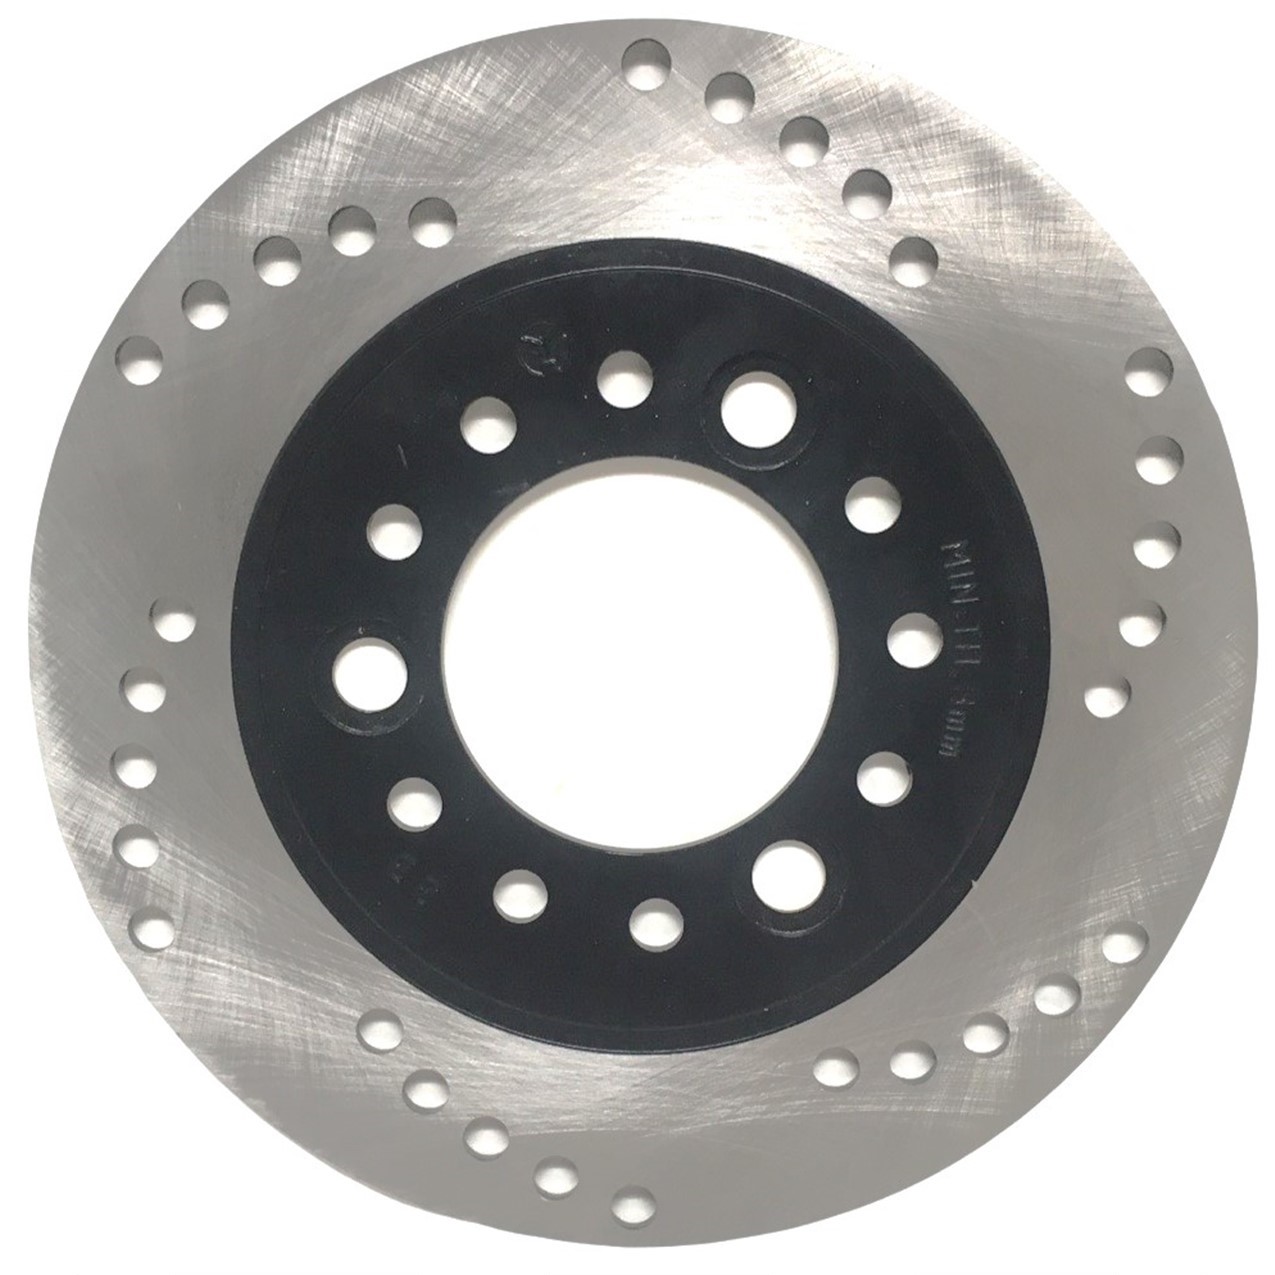 Disc Brake Rotor OD=179 ID=58 Bolts c/c=69 Fits Tao Tao CY50A (VIP 50), Powermax 150, CY150, E-Ton Sport 150, Tomos Nitro 150, Scooters + others - Click Image to Close